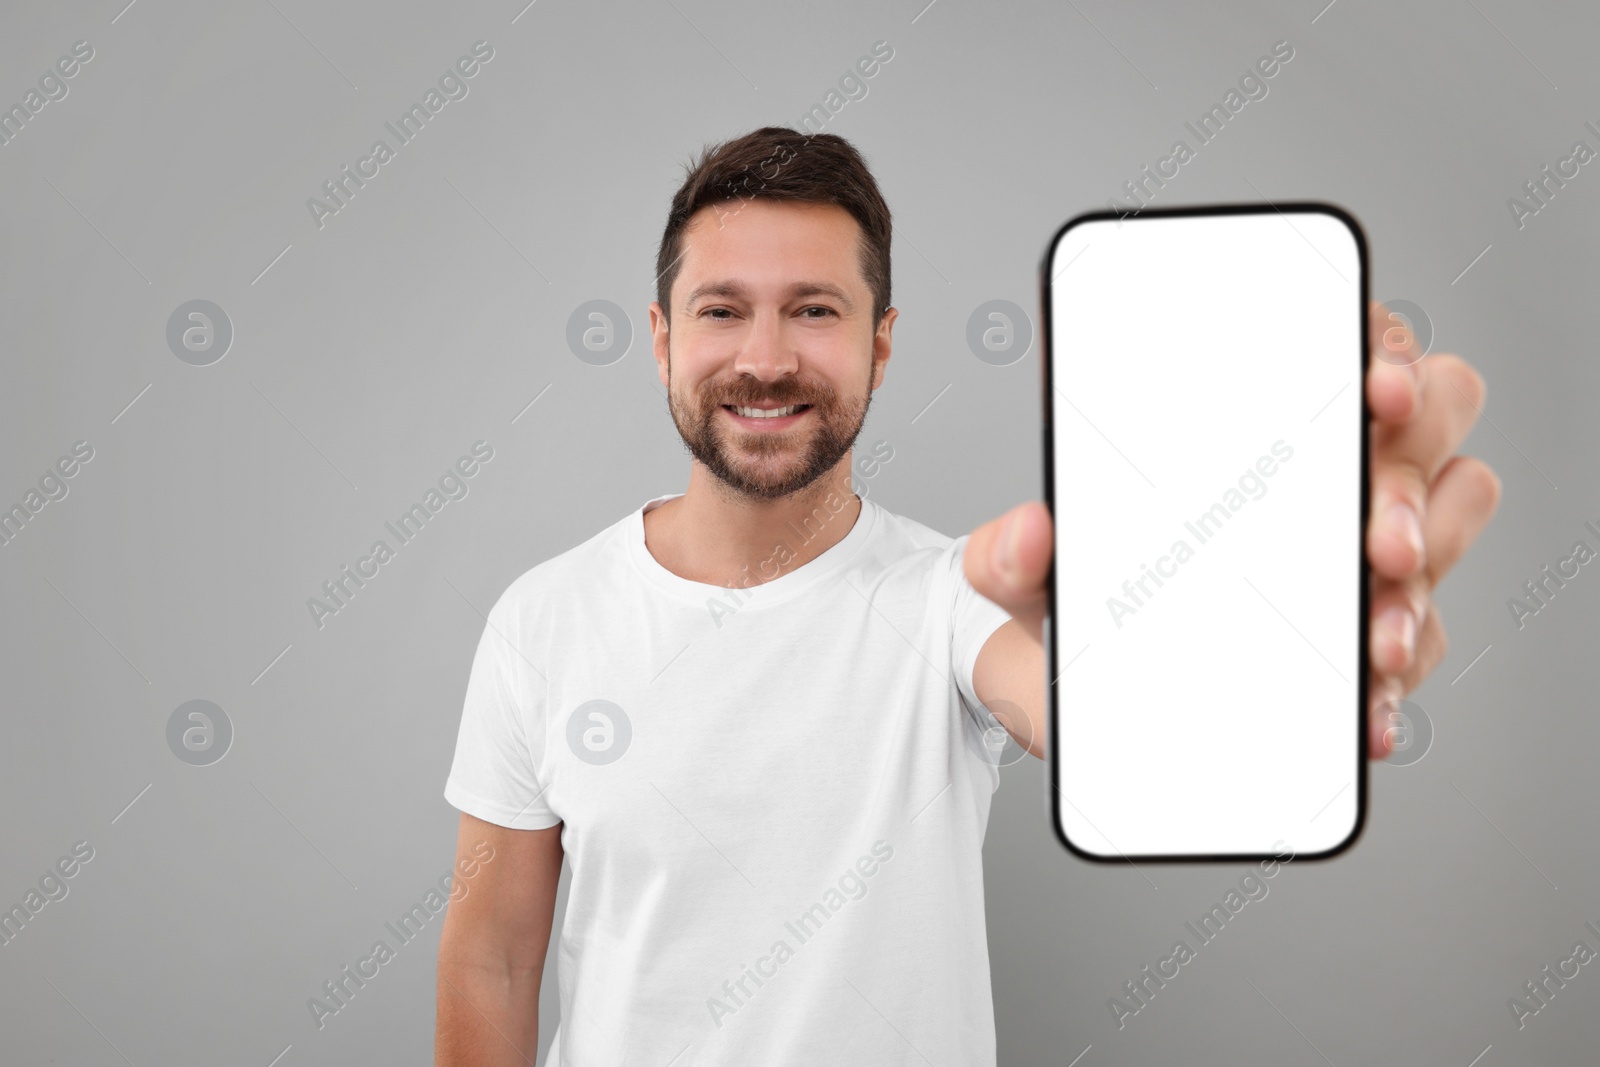 Photo of Handsome man showing smartphone in hand on light grey background